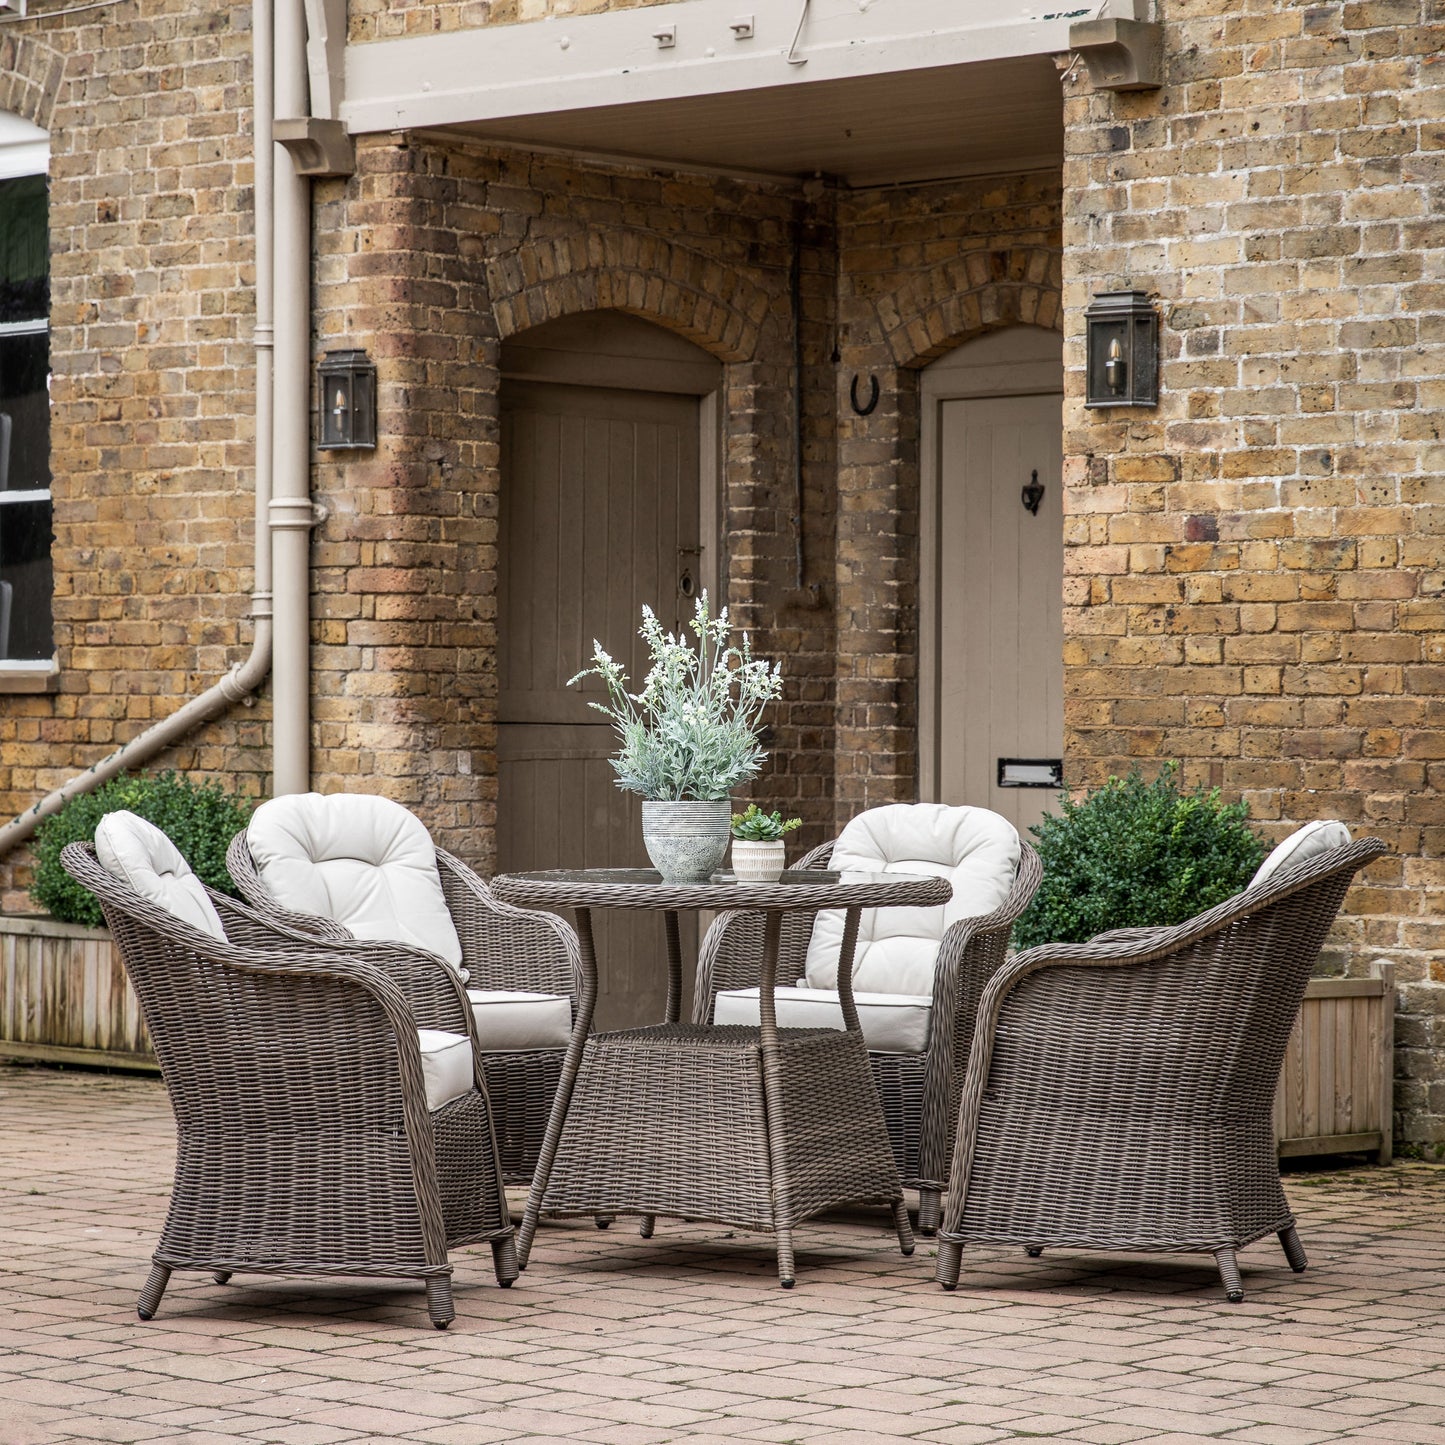 A Meavy 4 Seater Round Dining Set Natural by Kikiathome.co.uk enhancing interior decor in front of a brick building.